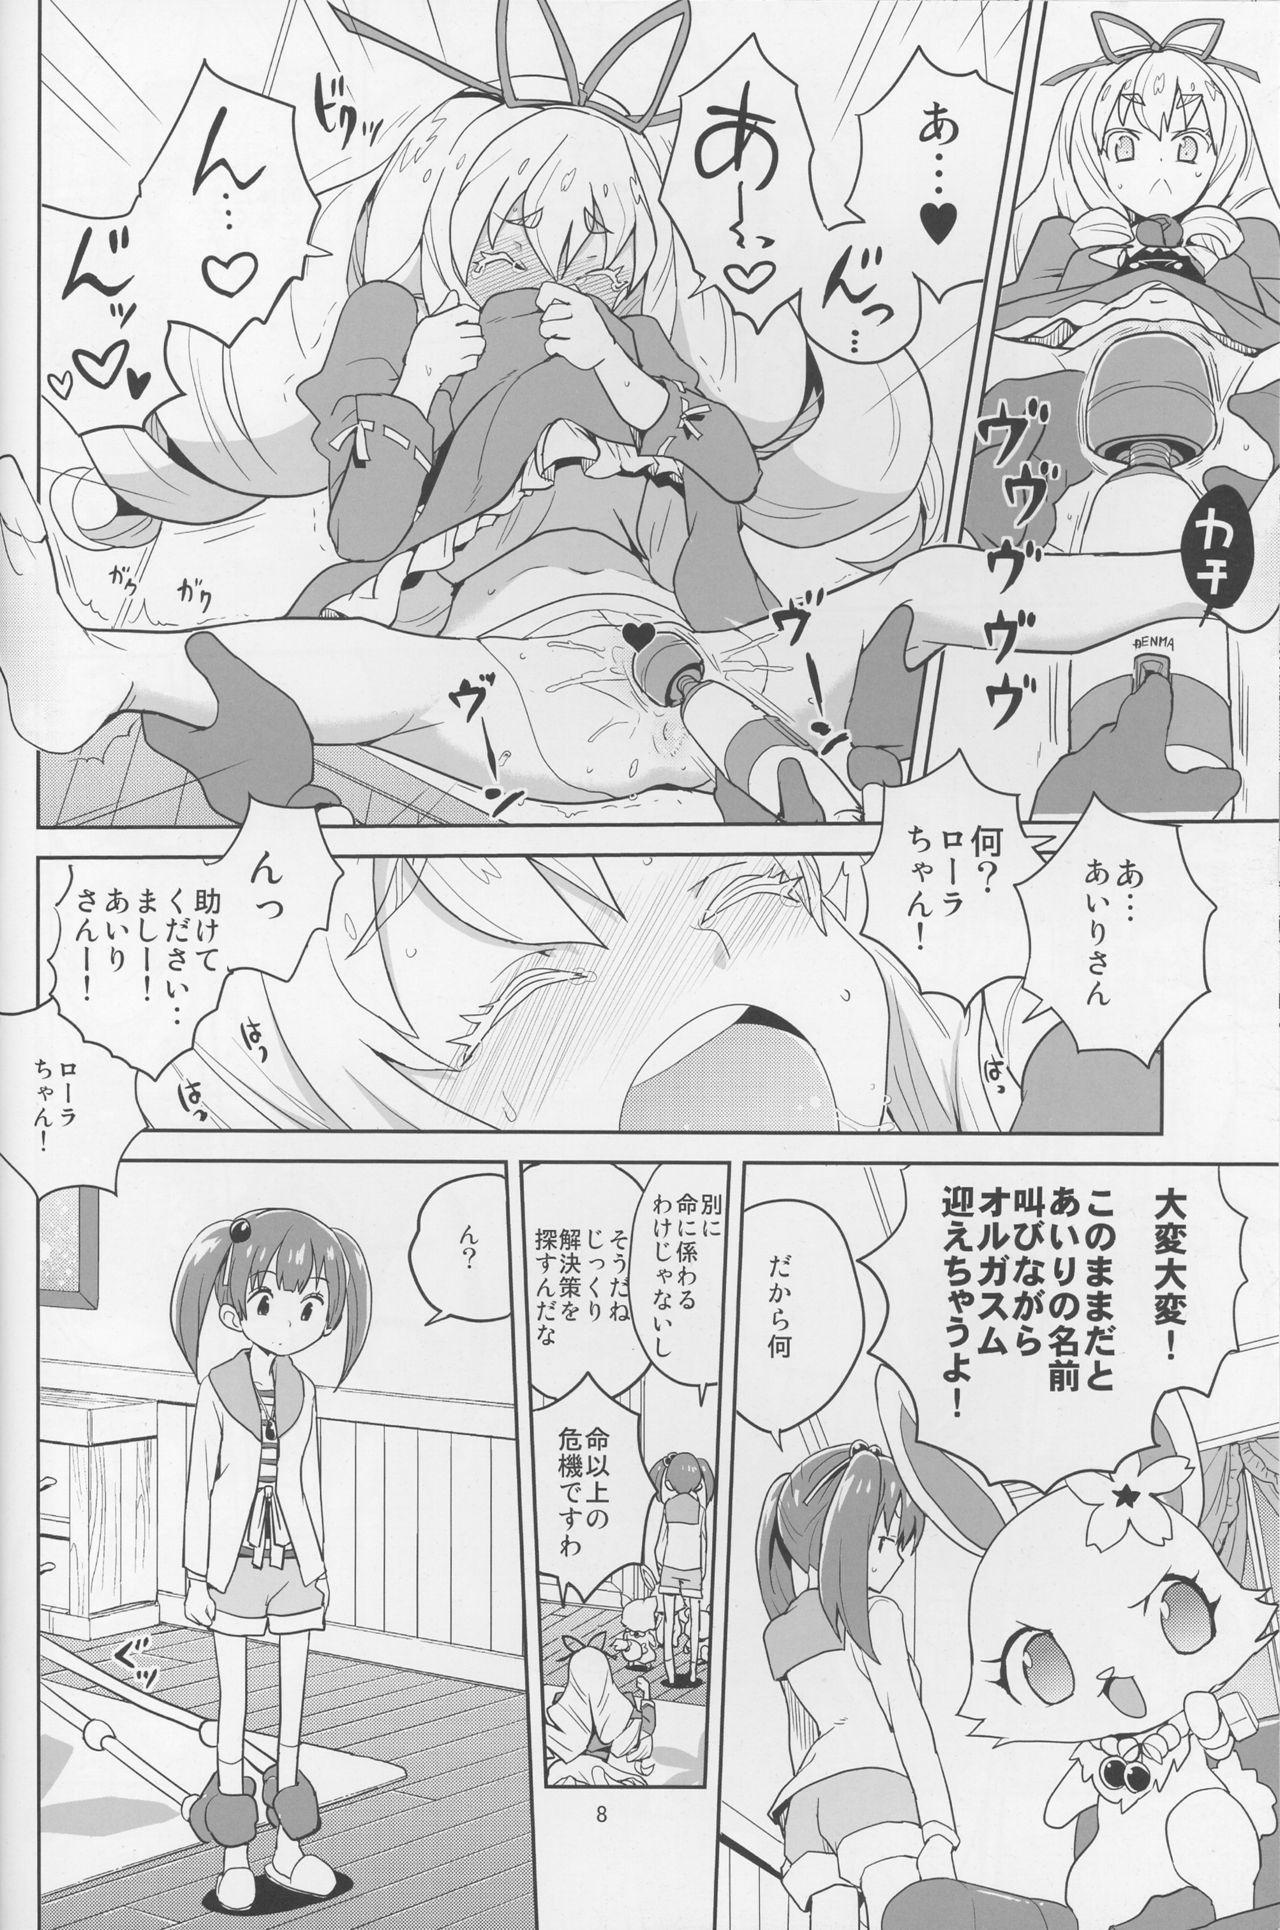 Girl Gets Fucked (SC2016 Summer) [Zenra Restaurant (Heriyama)] Laura-chan comment allez-vous (Jewelpet) - Jewelpet Babe - Page 7